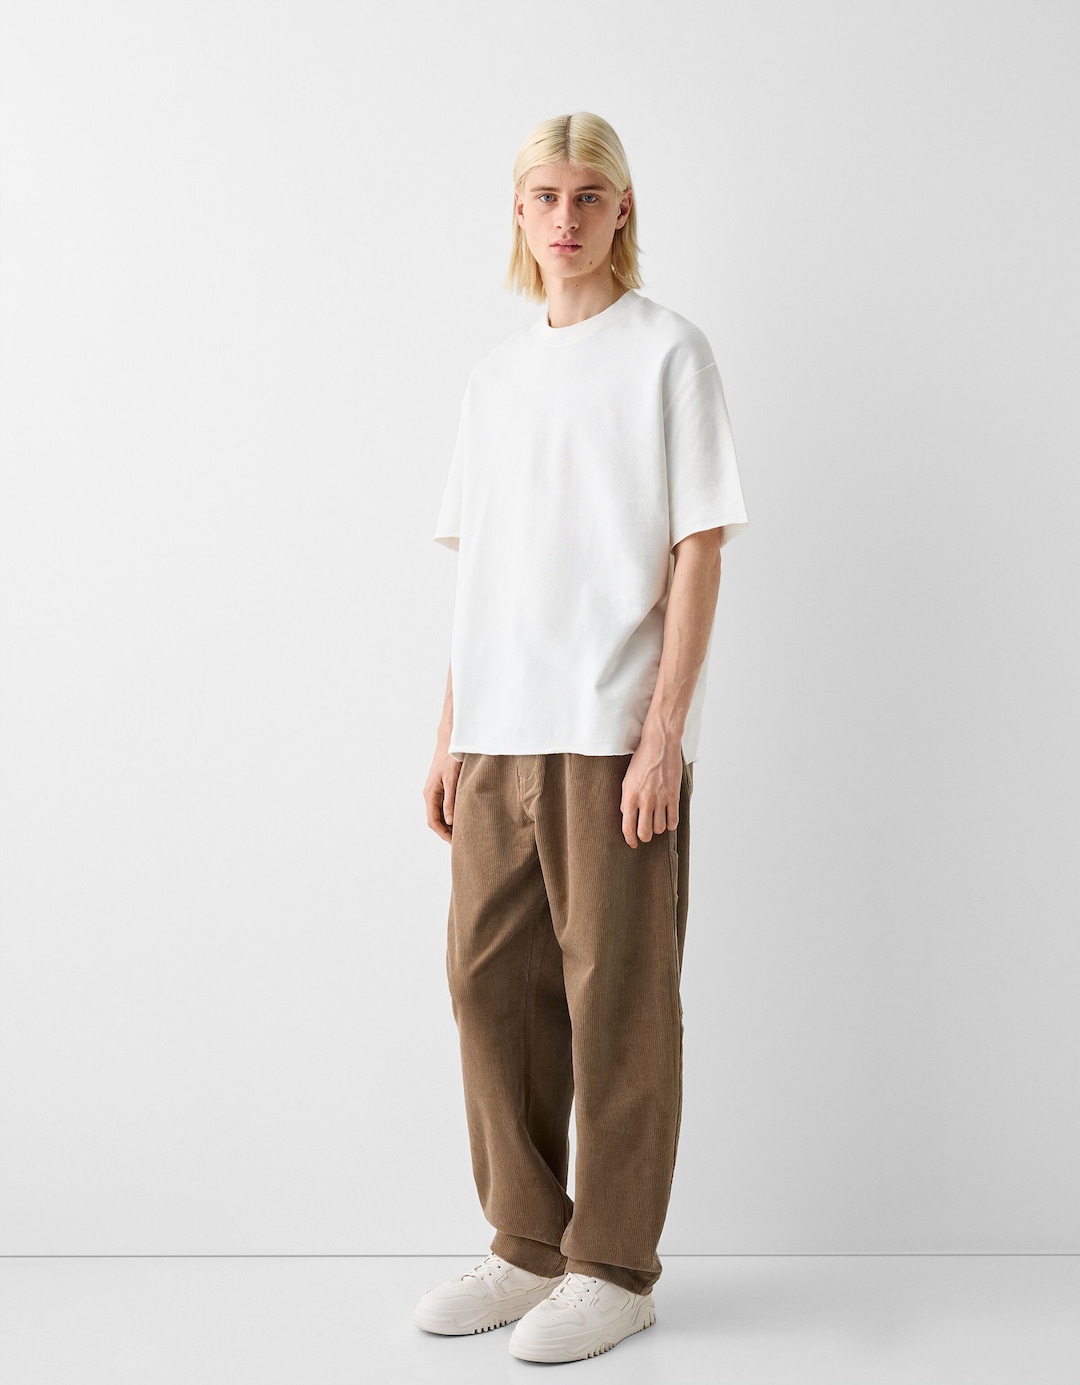 Darted corduroy skater trousers